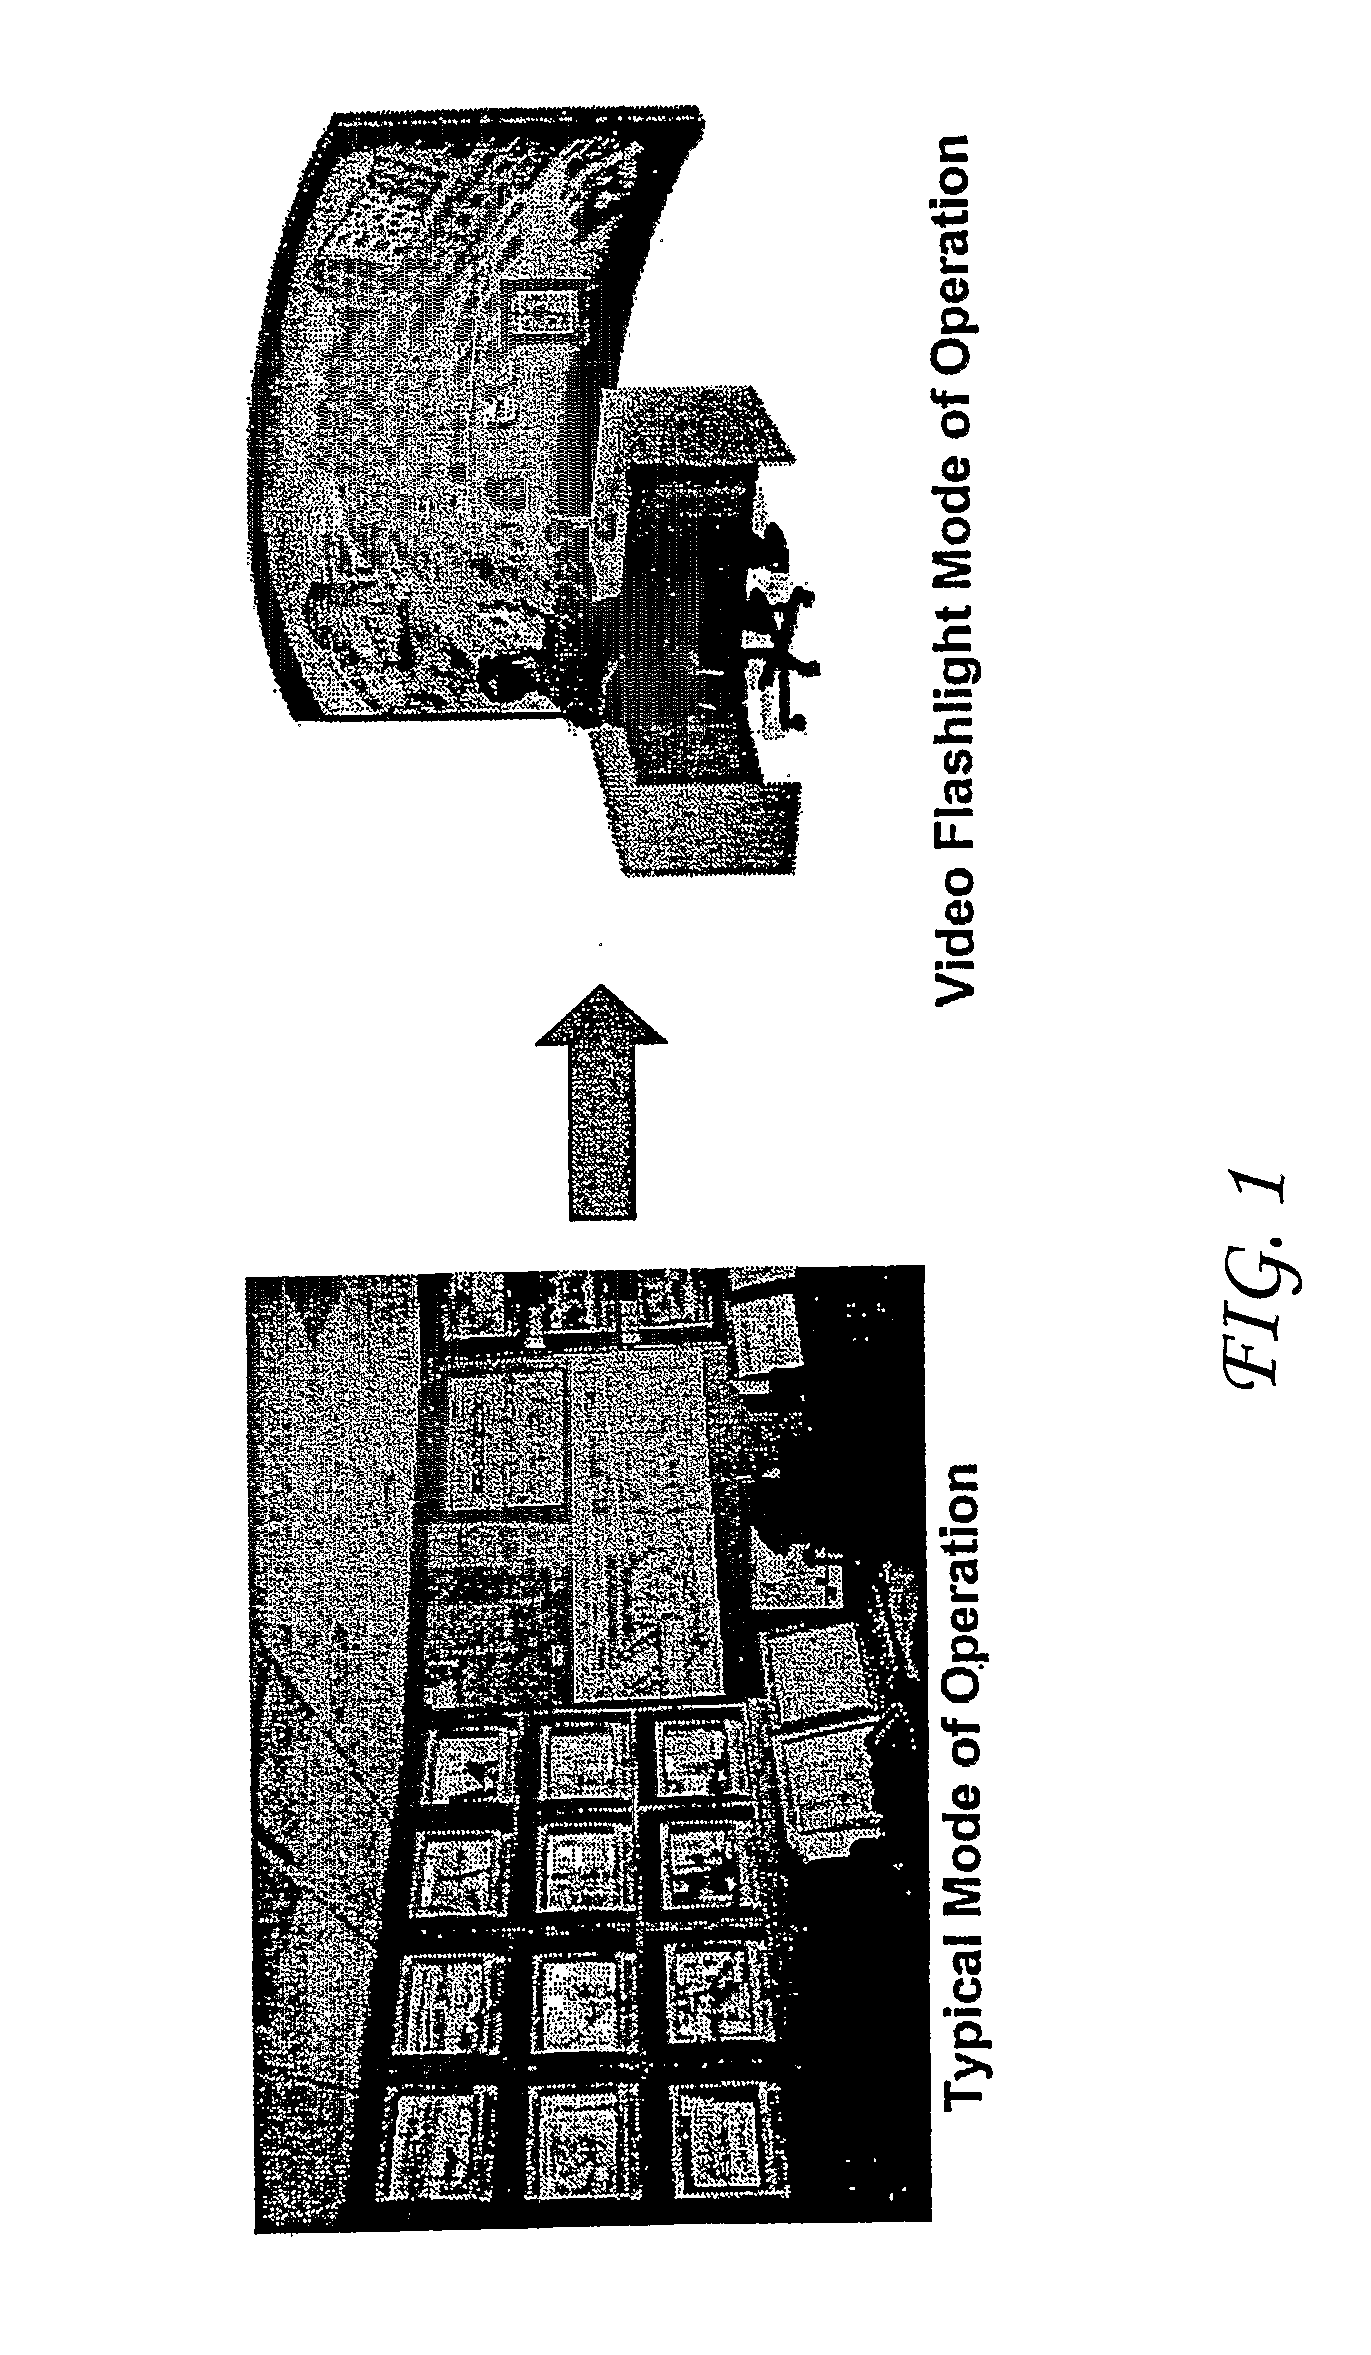 Method and System for Performing Video Flashlight